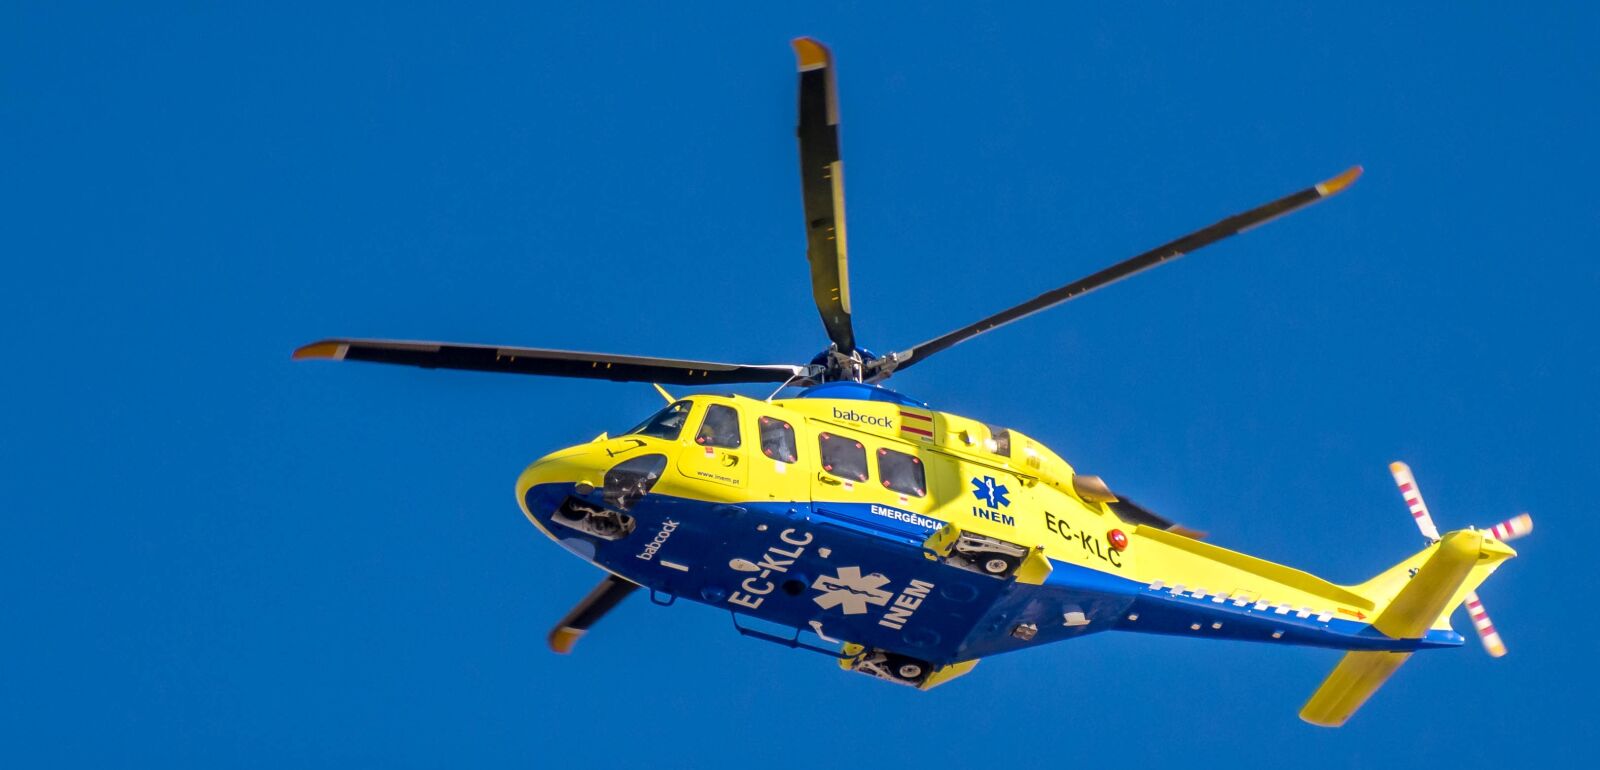 Nikon D5300 sample photo. Helicopter, air rescue, sky photography